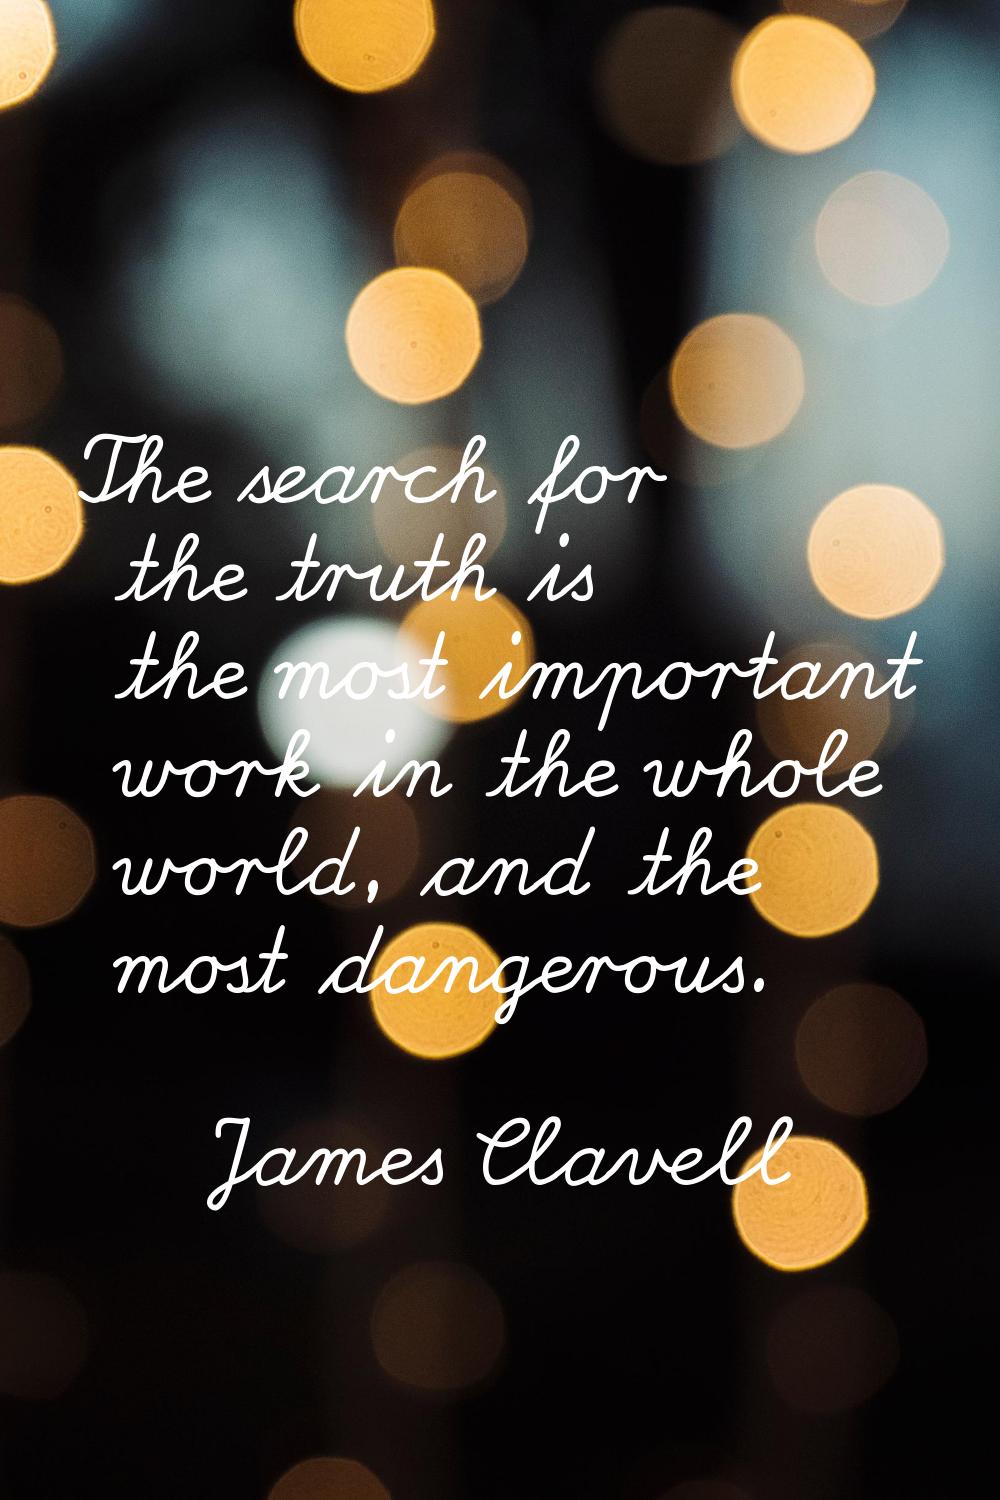 The search for the truth is the most important work in the whole world, and the most dangerous.